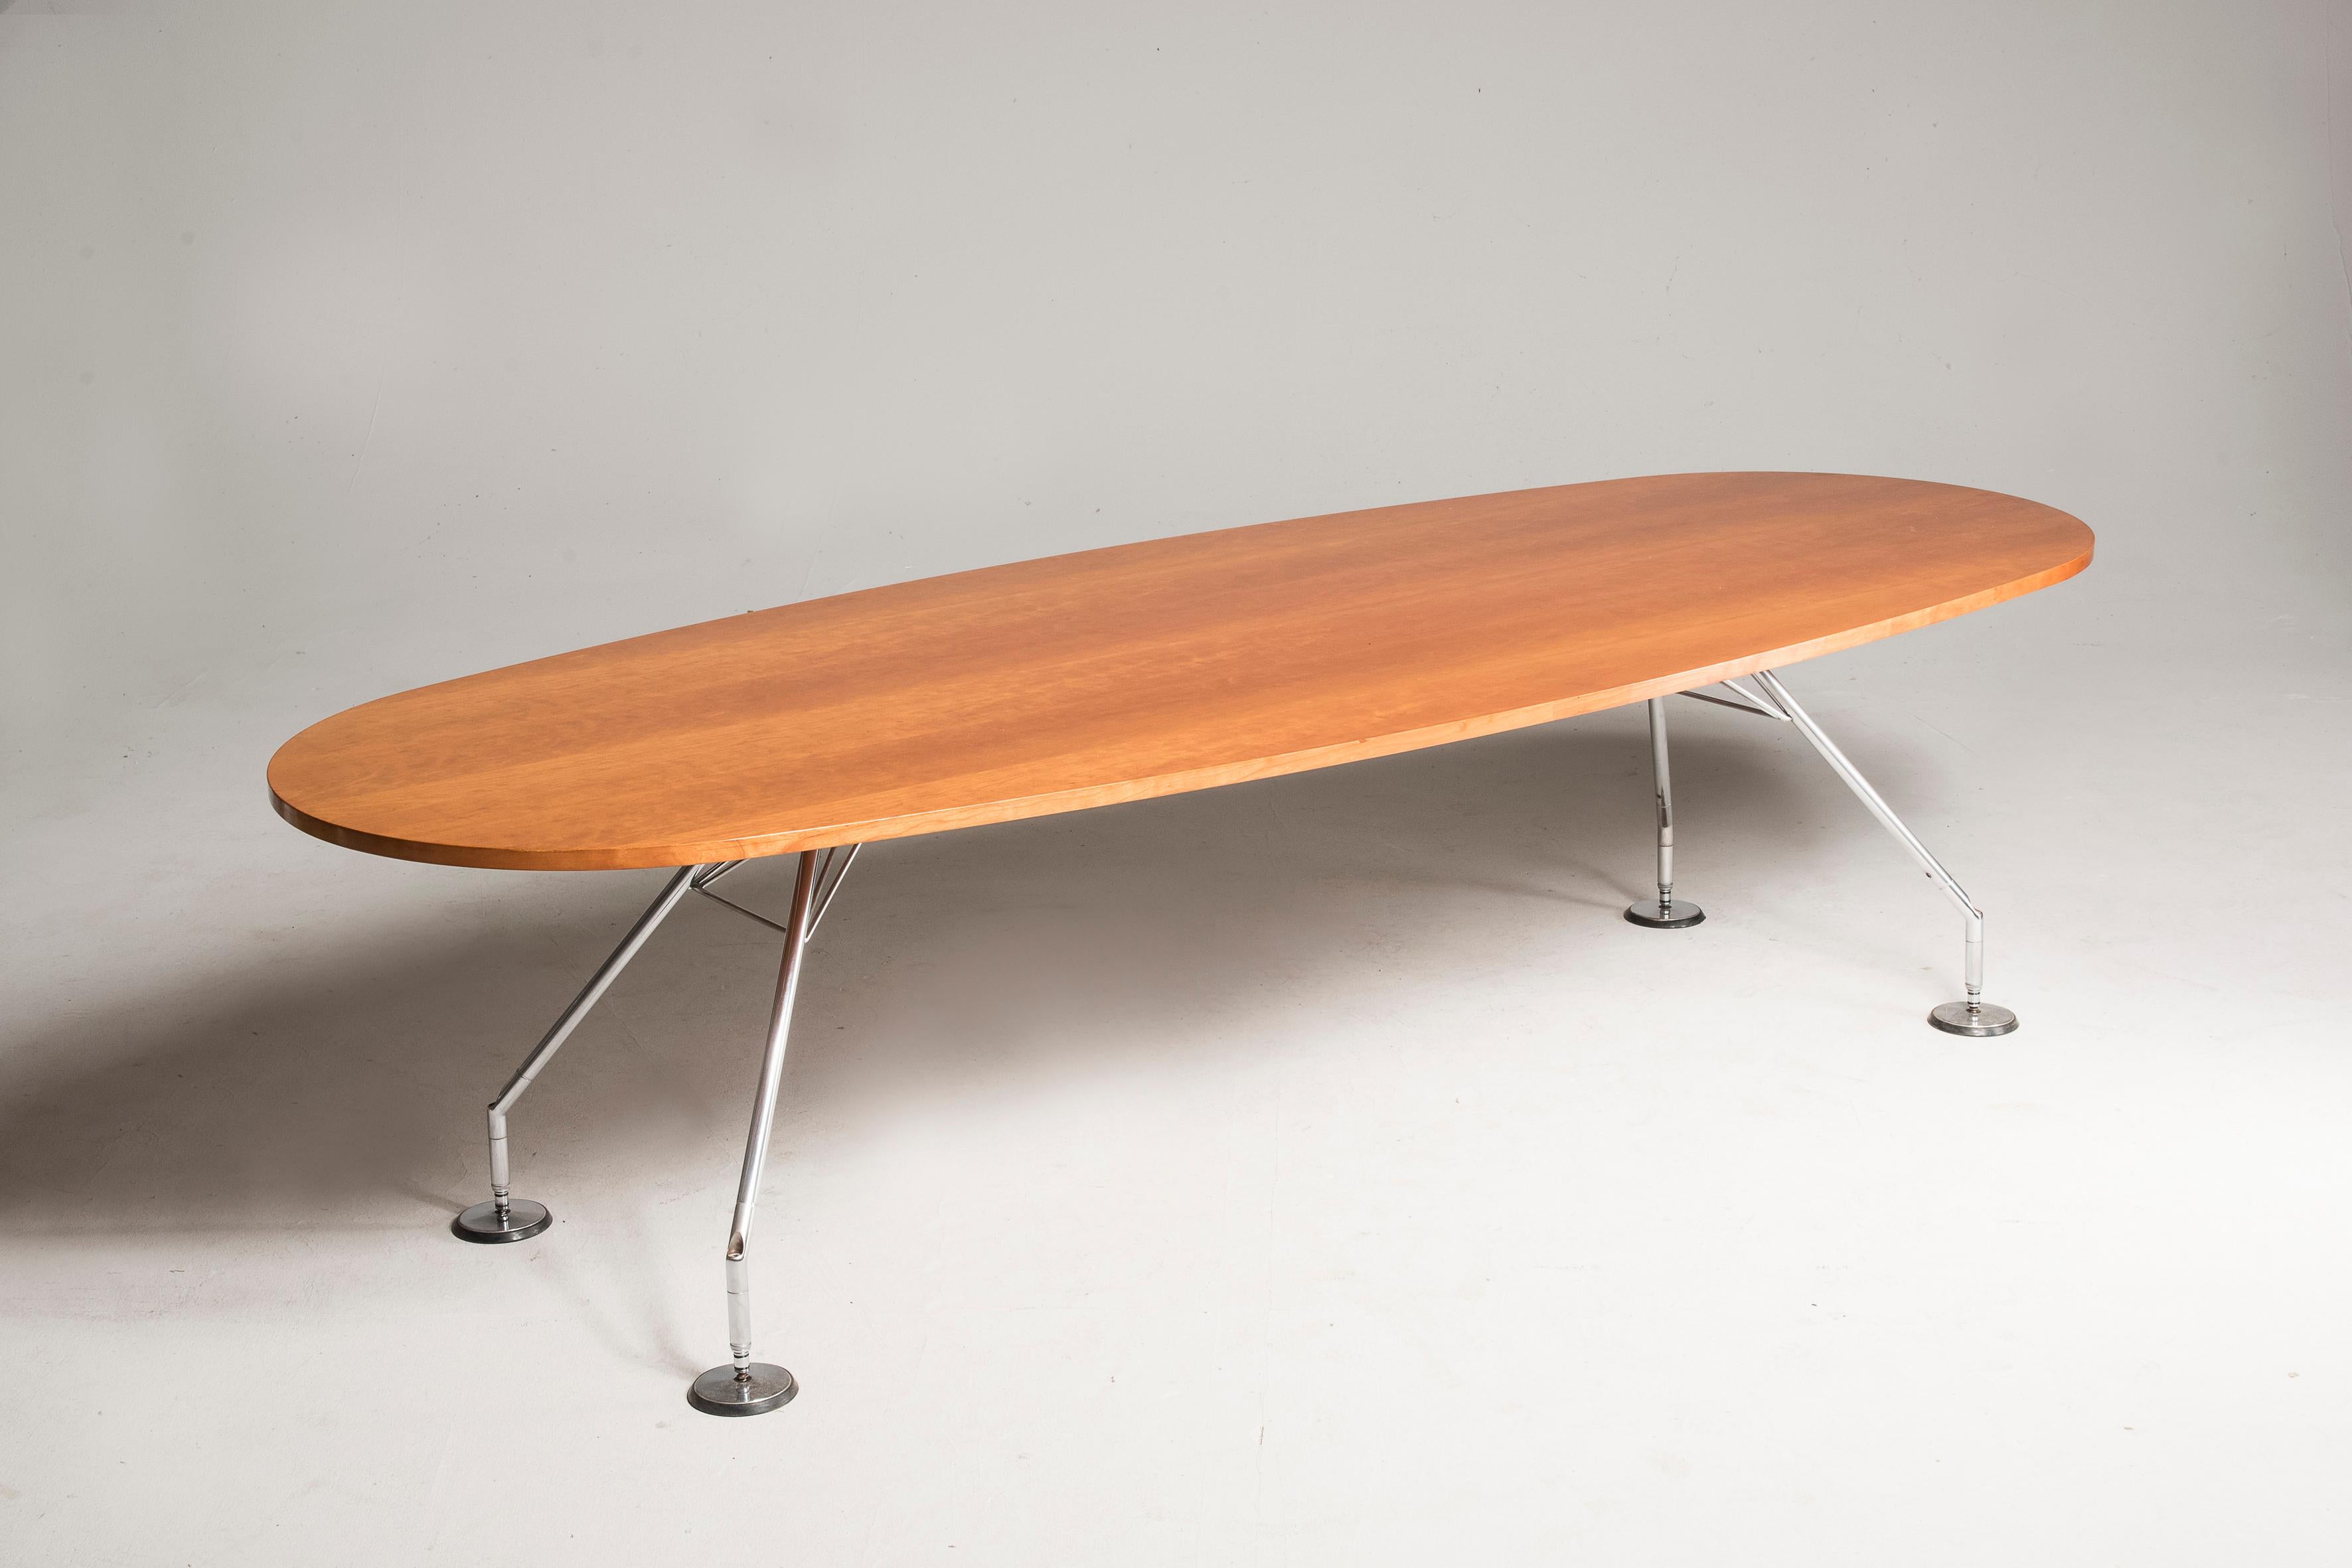 1980s table by Norman Foster for Tecno
Oval top in walnut wood
And base in aluminum and chromed iron
Excellent conditions
Size 110 x 280 x 71 cm.
Oval shape: refined and different from the usual - large size 110 x 280 cm - comfortably accommodates